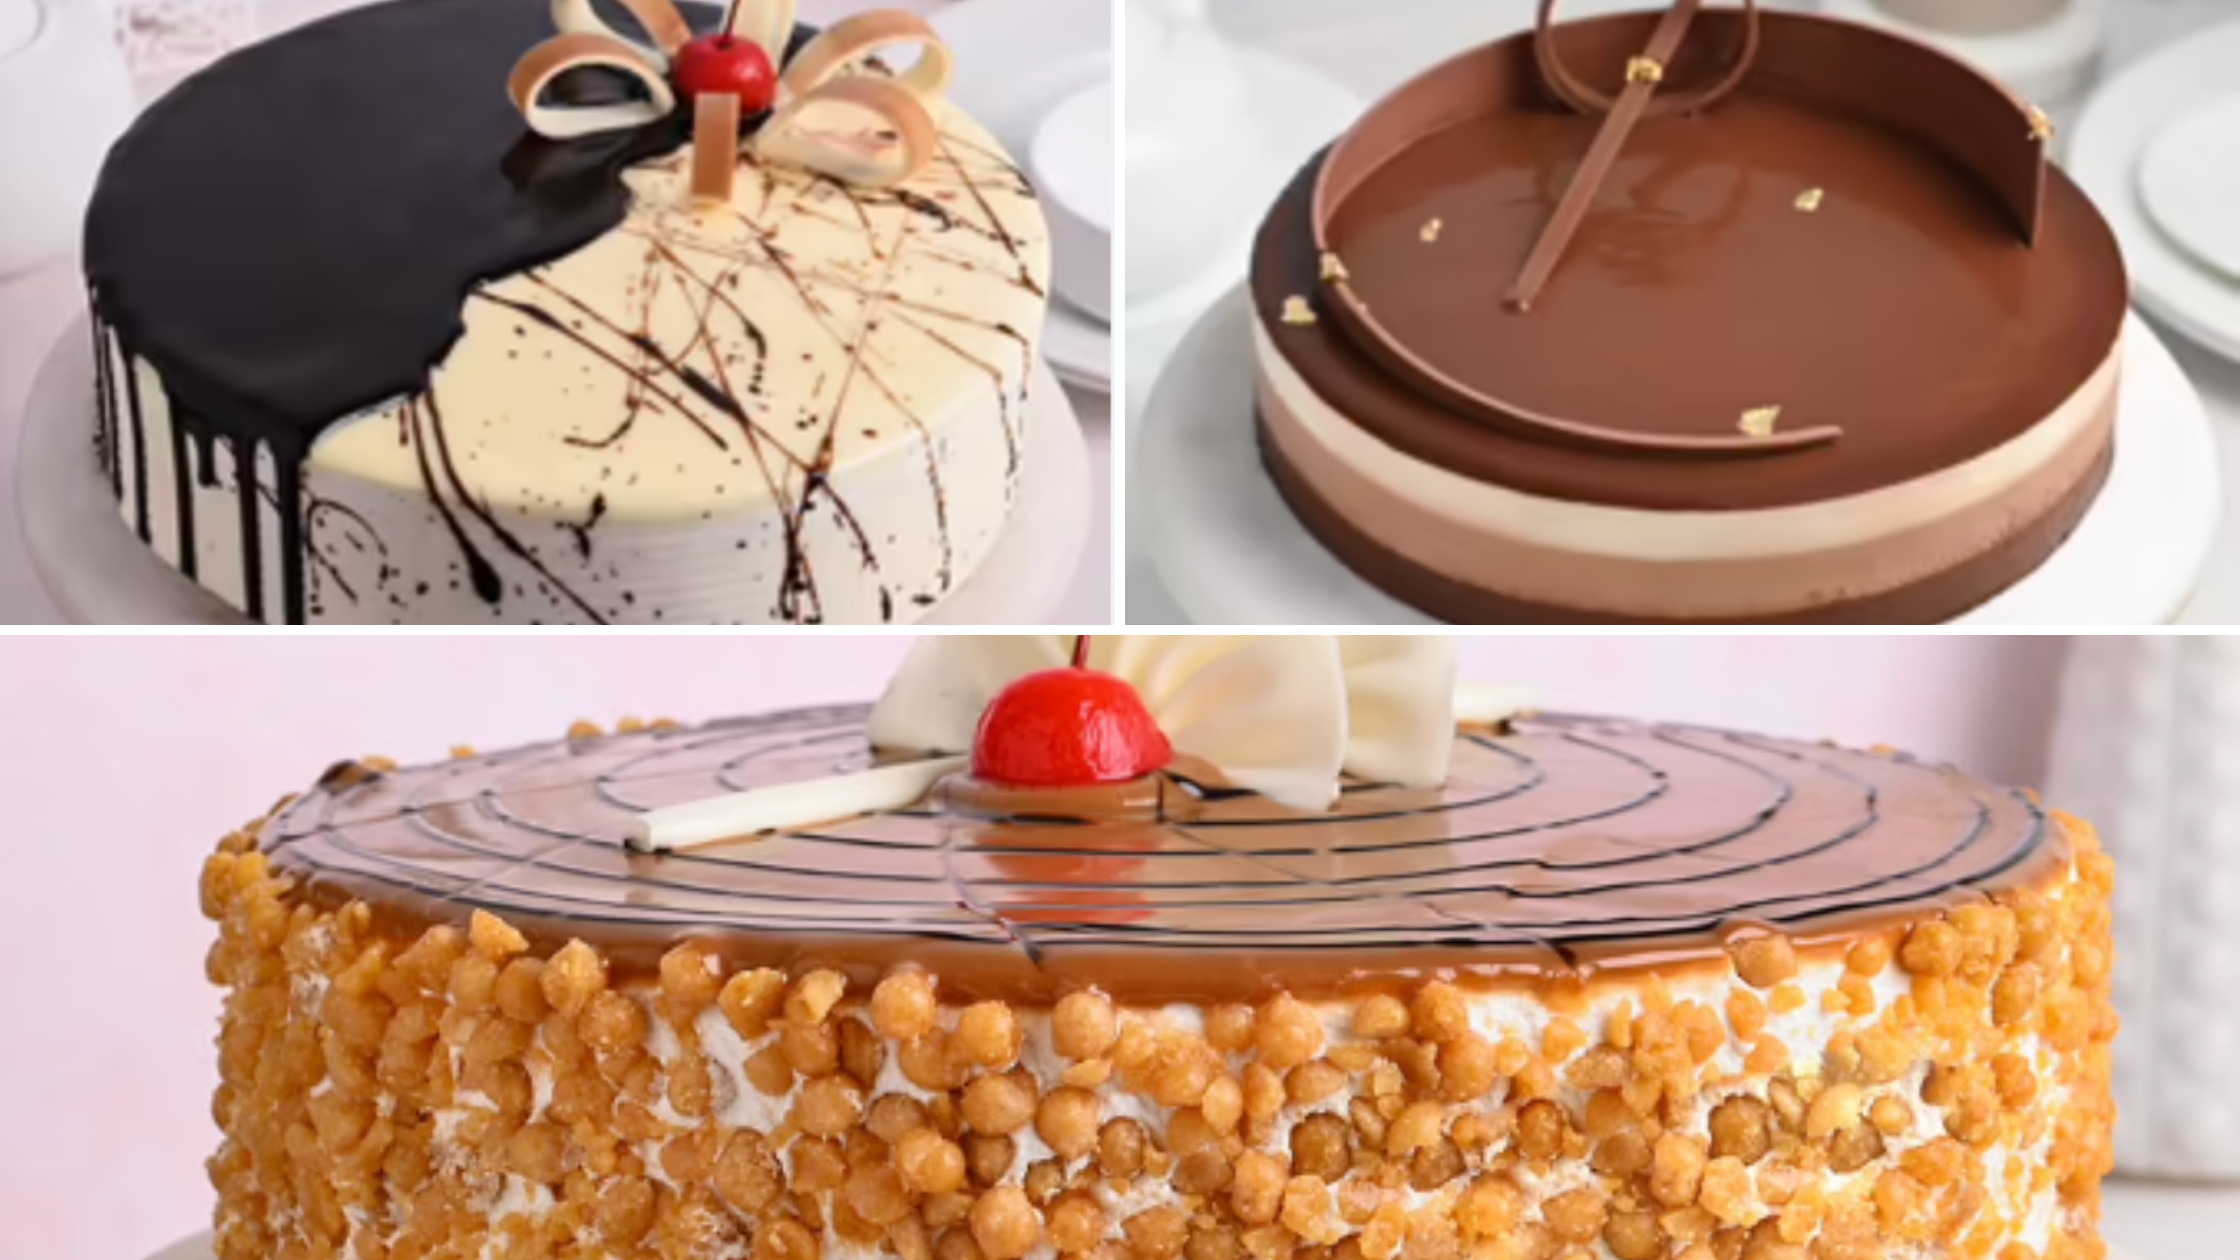 BAKINGO: Delivering Cakes That Will Melt Your Heart RVCJ Media